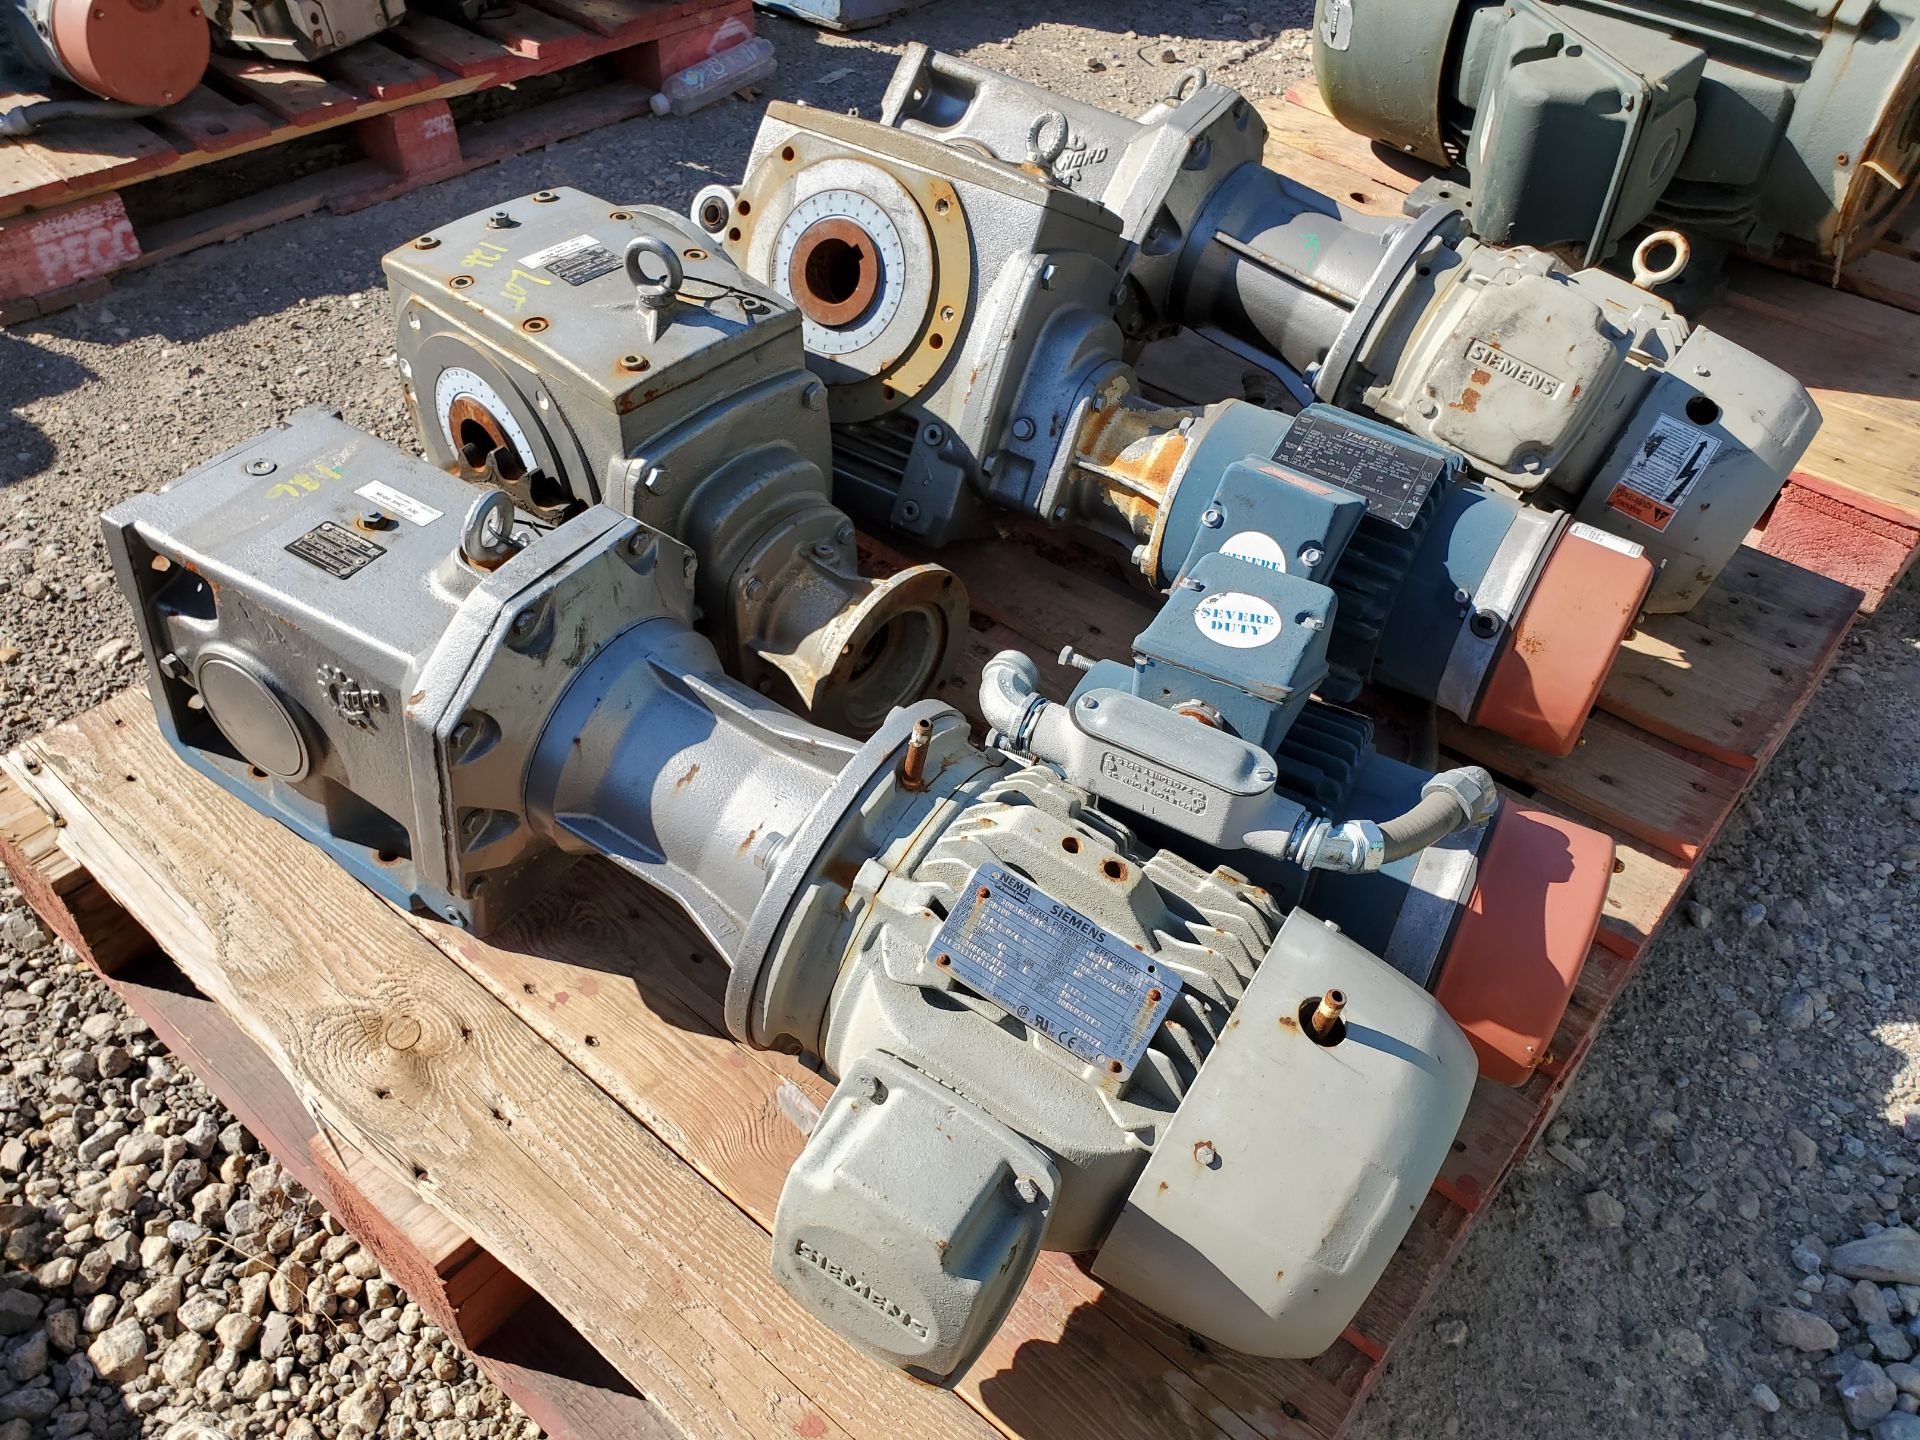 (4) NORD DRIVESYSTEMS 25.39:1 GEAR REDUCERS WITH GE 1 HP ELECTRIC MOTORS - Image 7 of 8